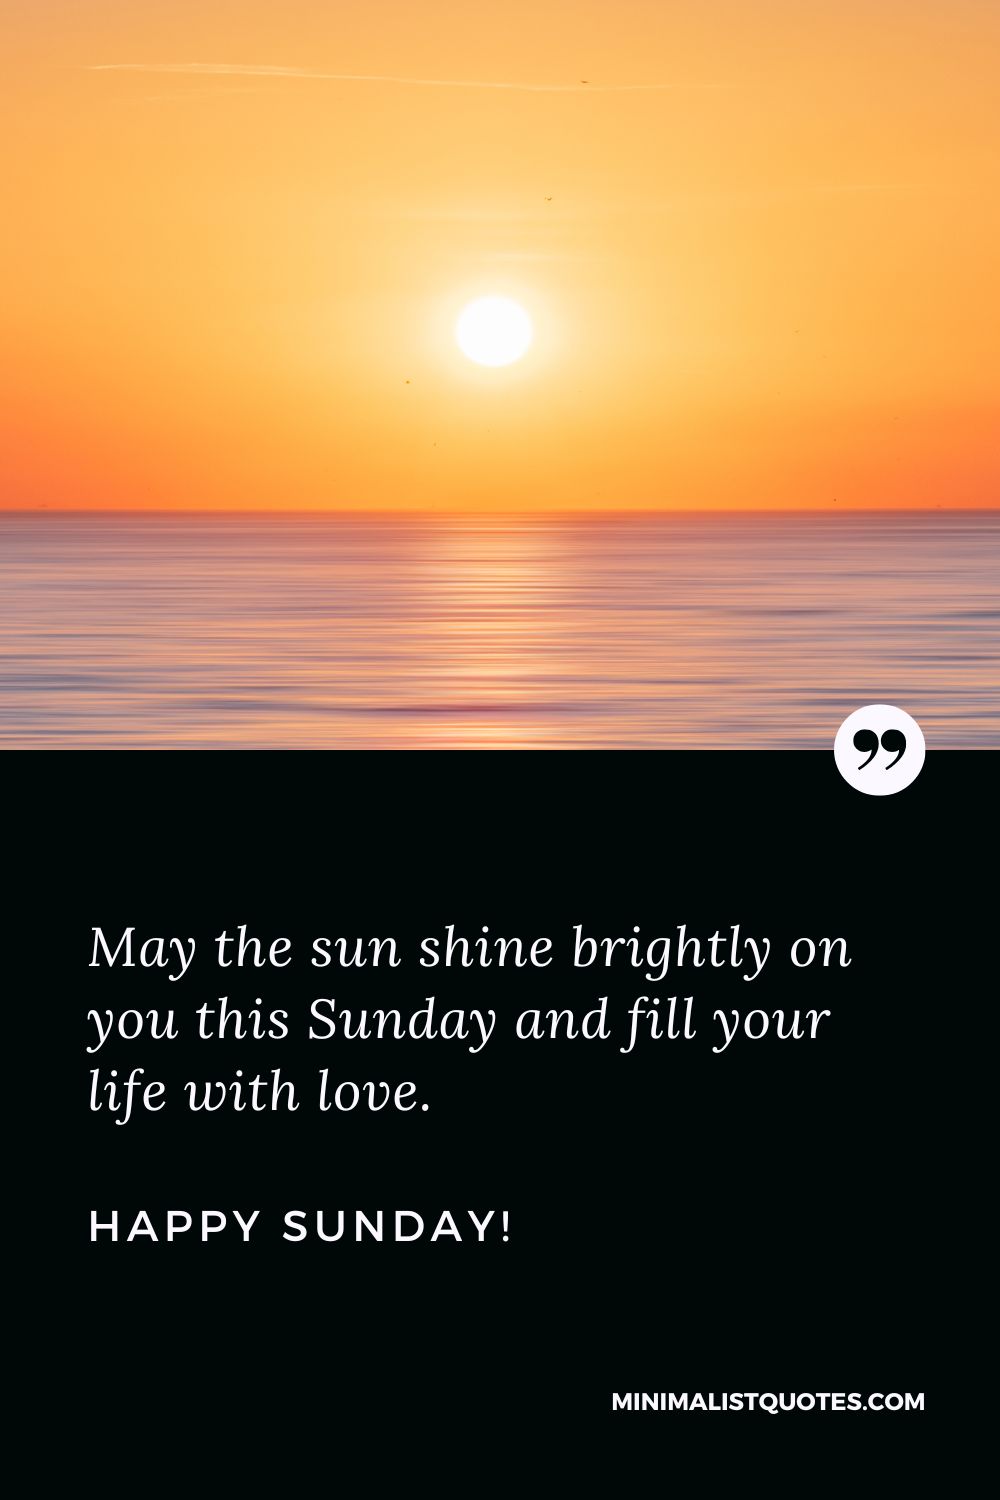 May the sun shine brightly on you this Sunday and fill your life ...